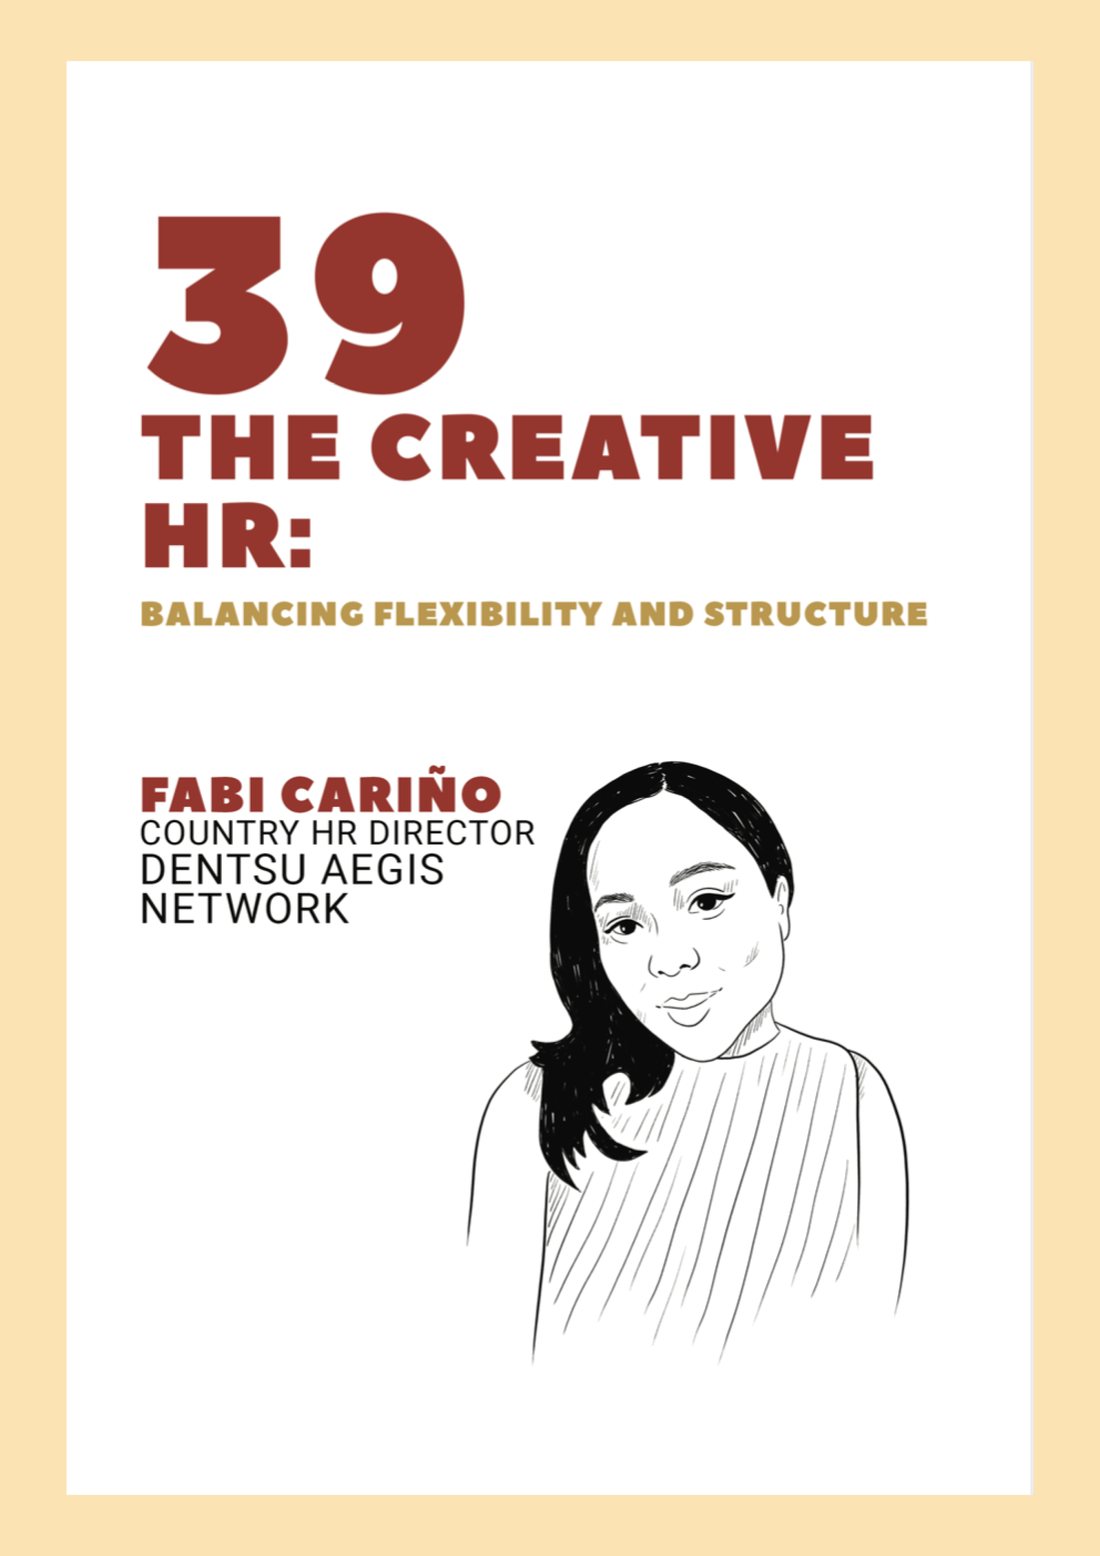 The Creative HR: Balancing Flexibility and Structure